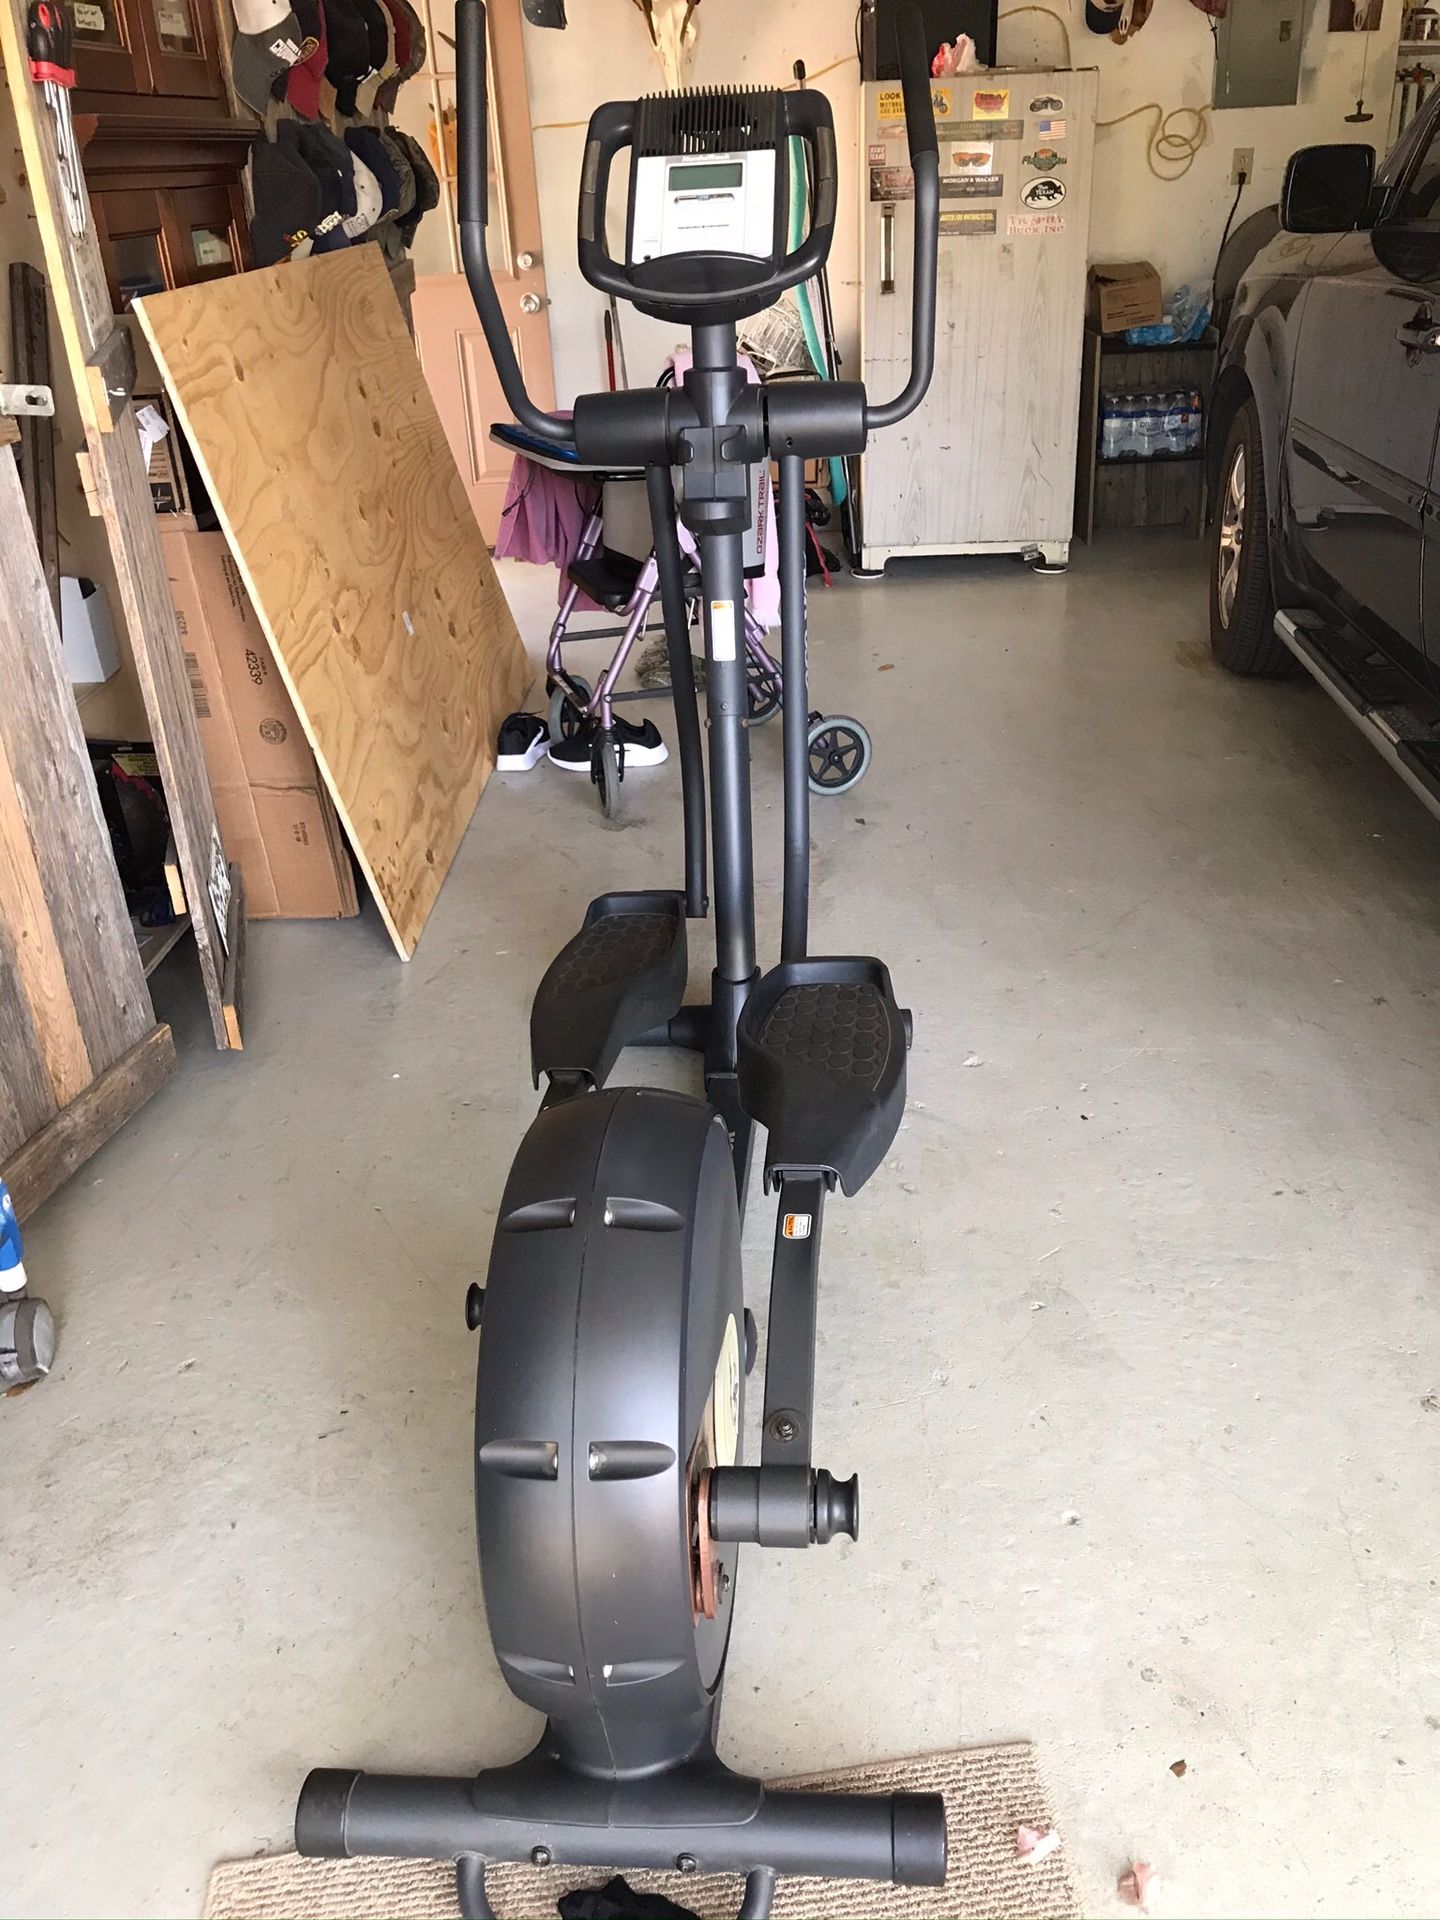 NordicTrack Elliptical plug and play mp3